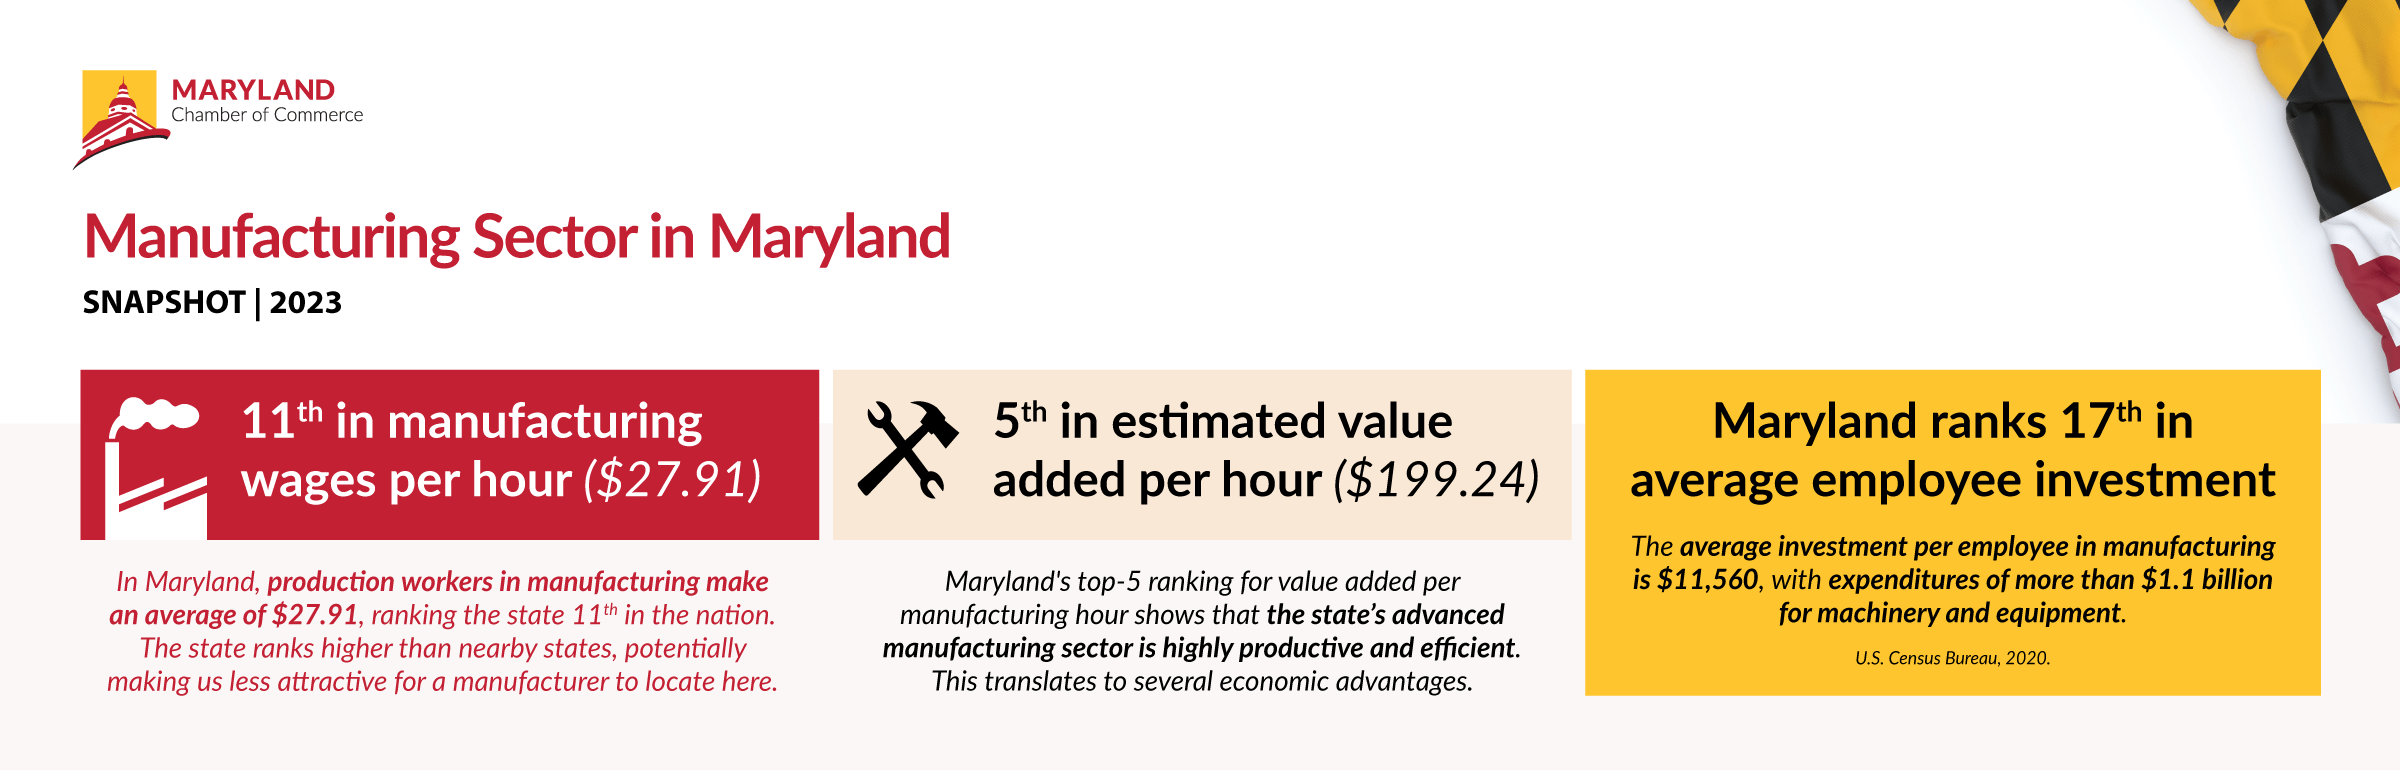 An infographic that demonstrates a variety of rankings regarding Maryland's manufacturing sector, including: 11th in Manufacturing wages per hour ($27.91): In Maryland, production workers make an average of $27.91, ranking the state 11th in the nation. The state ranks higher than nearby states, potentially making us less attractive for a manufacturer to locate here. 5th in estimated value added per hour ($199.24): Maryland's top 5 ranking for value added per manufacturing hour shows that the state's advanced manufacturing sector is highly productive and efficient. This translates to several economic advantages. Maryland ranks 17th in average employee investment. The average investment per employee in manufacturing is $11,560, with expenditures of more than $1.1 billion for machinery and equipment.